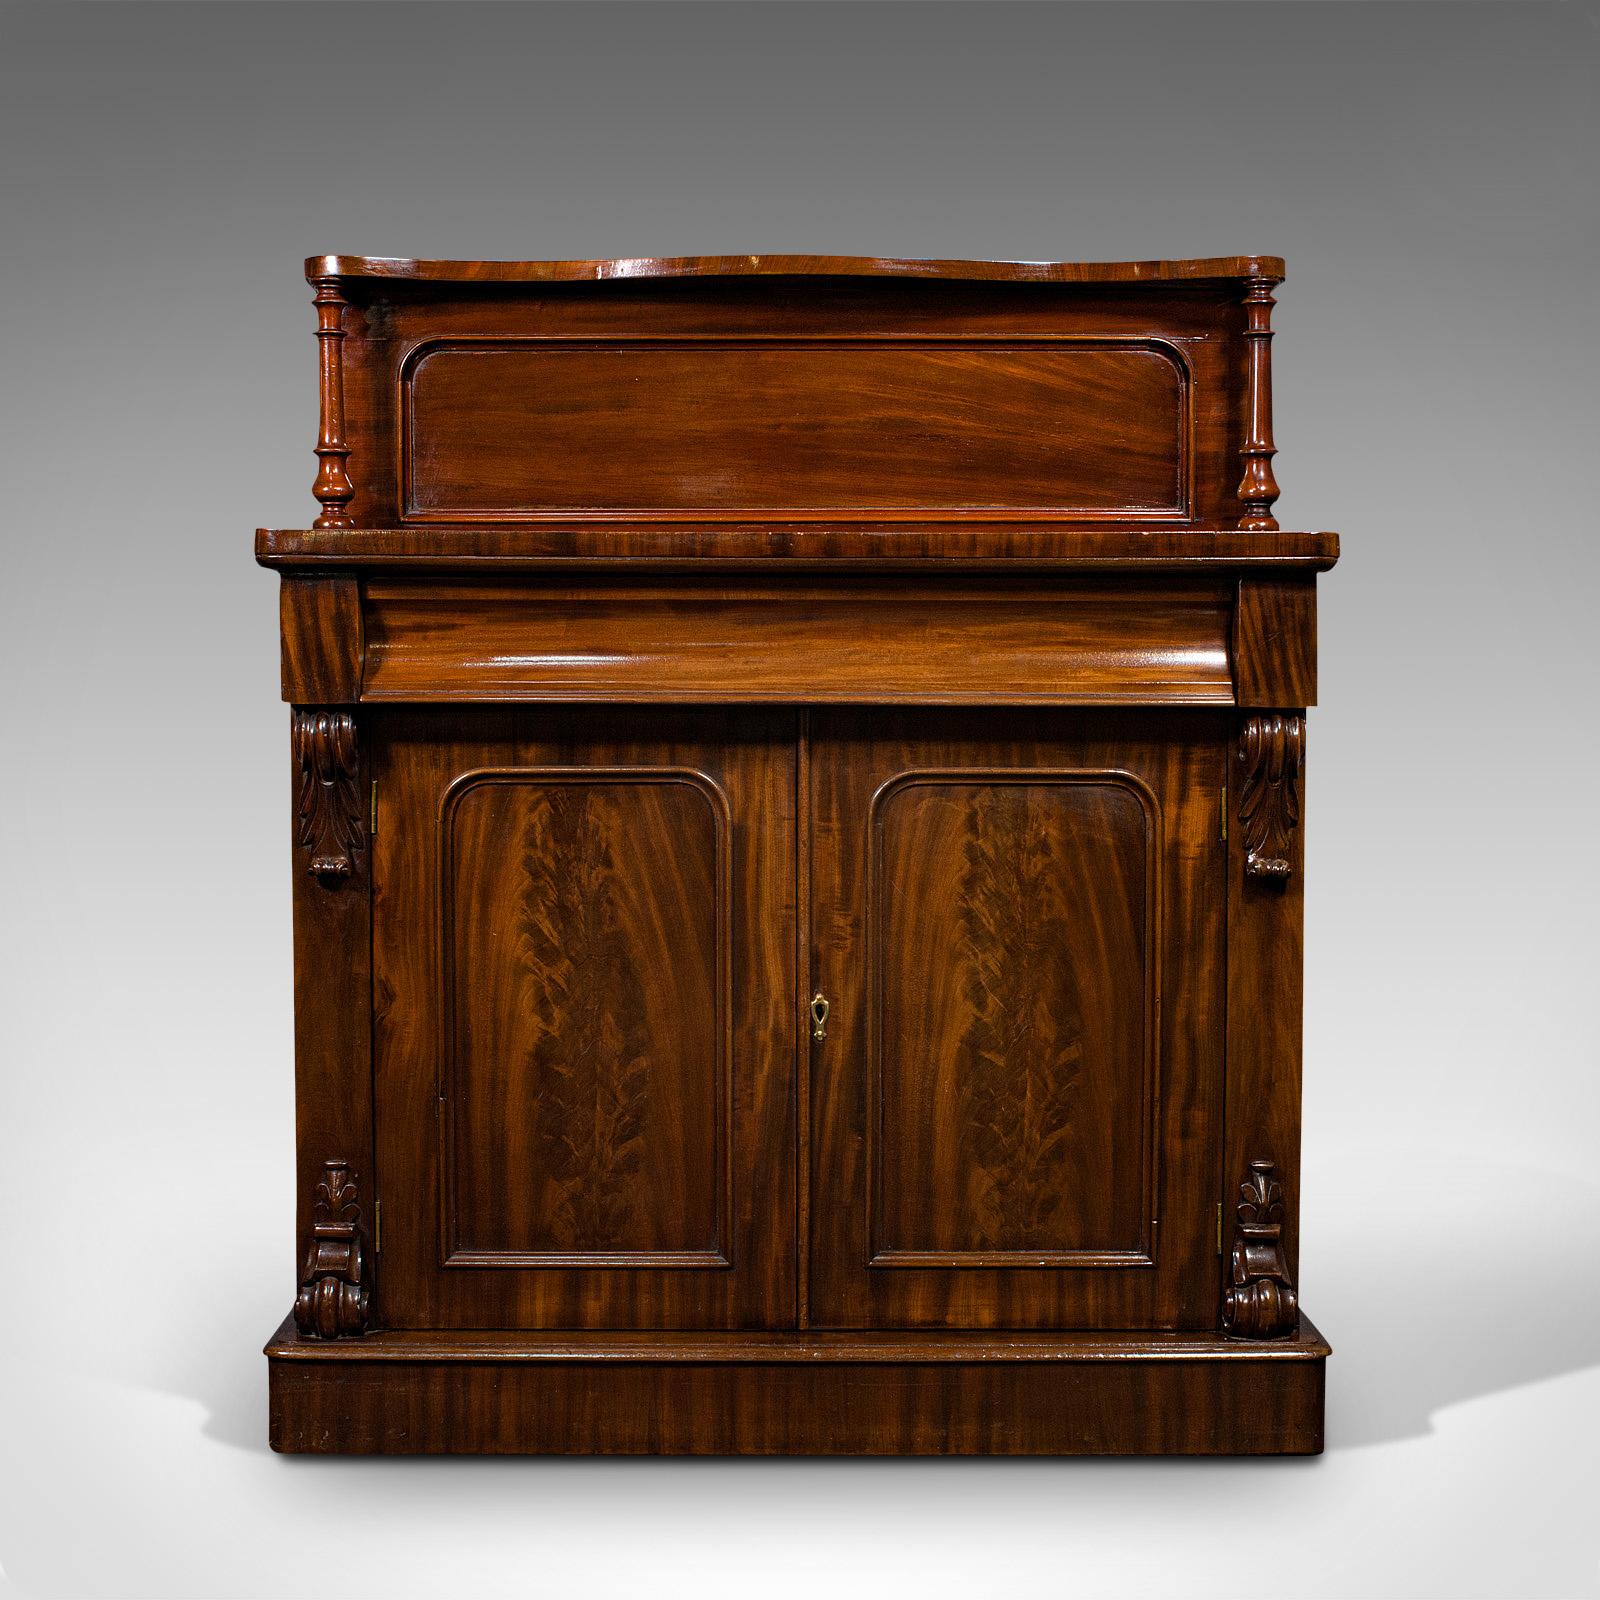 This is an elegant antique chiffonier. An English, mahogany sideboard cabinet, dating to the Victorian period, circa 1880.

Beautifully figured with attractive craftsmanship
Displaying a desirable aged patina
Select mahogany offers superb grain